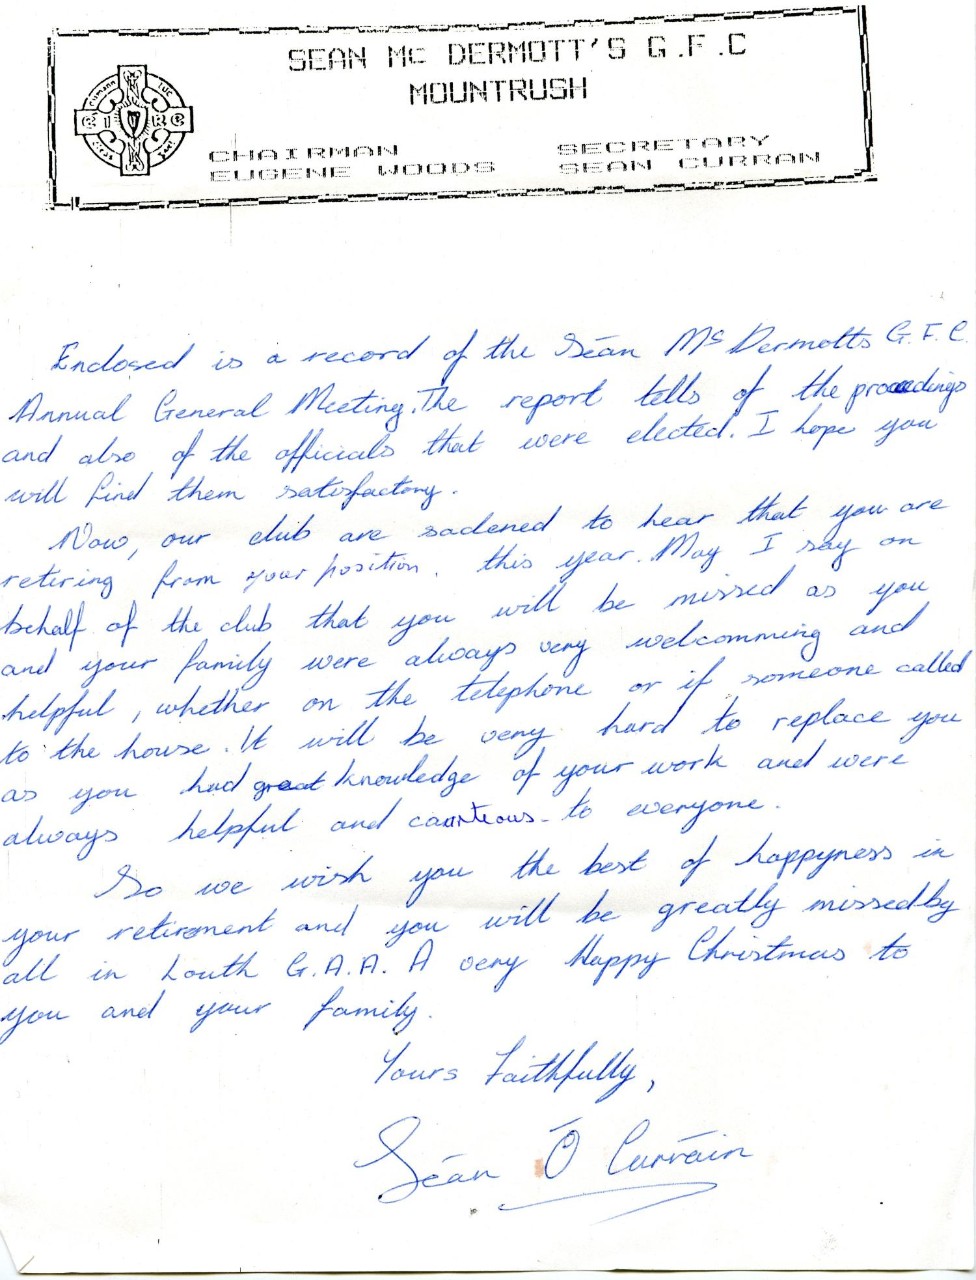 Letter from Sean McDermott’s GFC, Mountrush, to Peadar Kearney, Secretary/Treasurer of Louth County Board, on the occasion of his retirement, thanking him and his family for their help over the years, 1988.